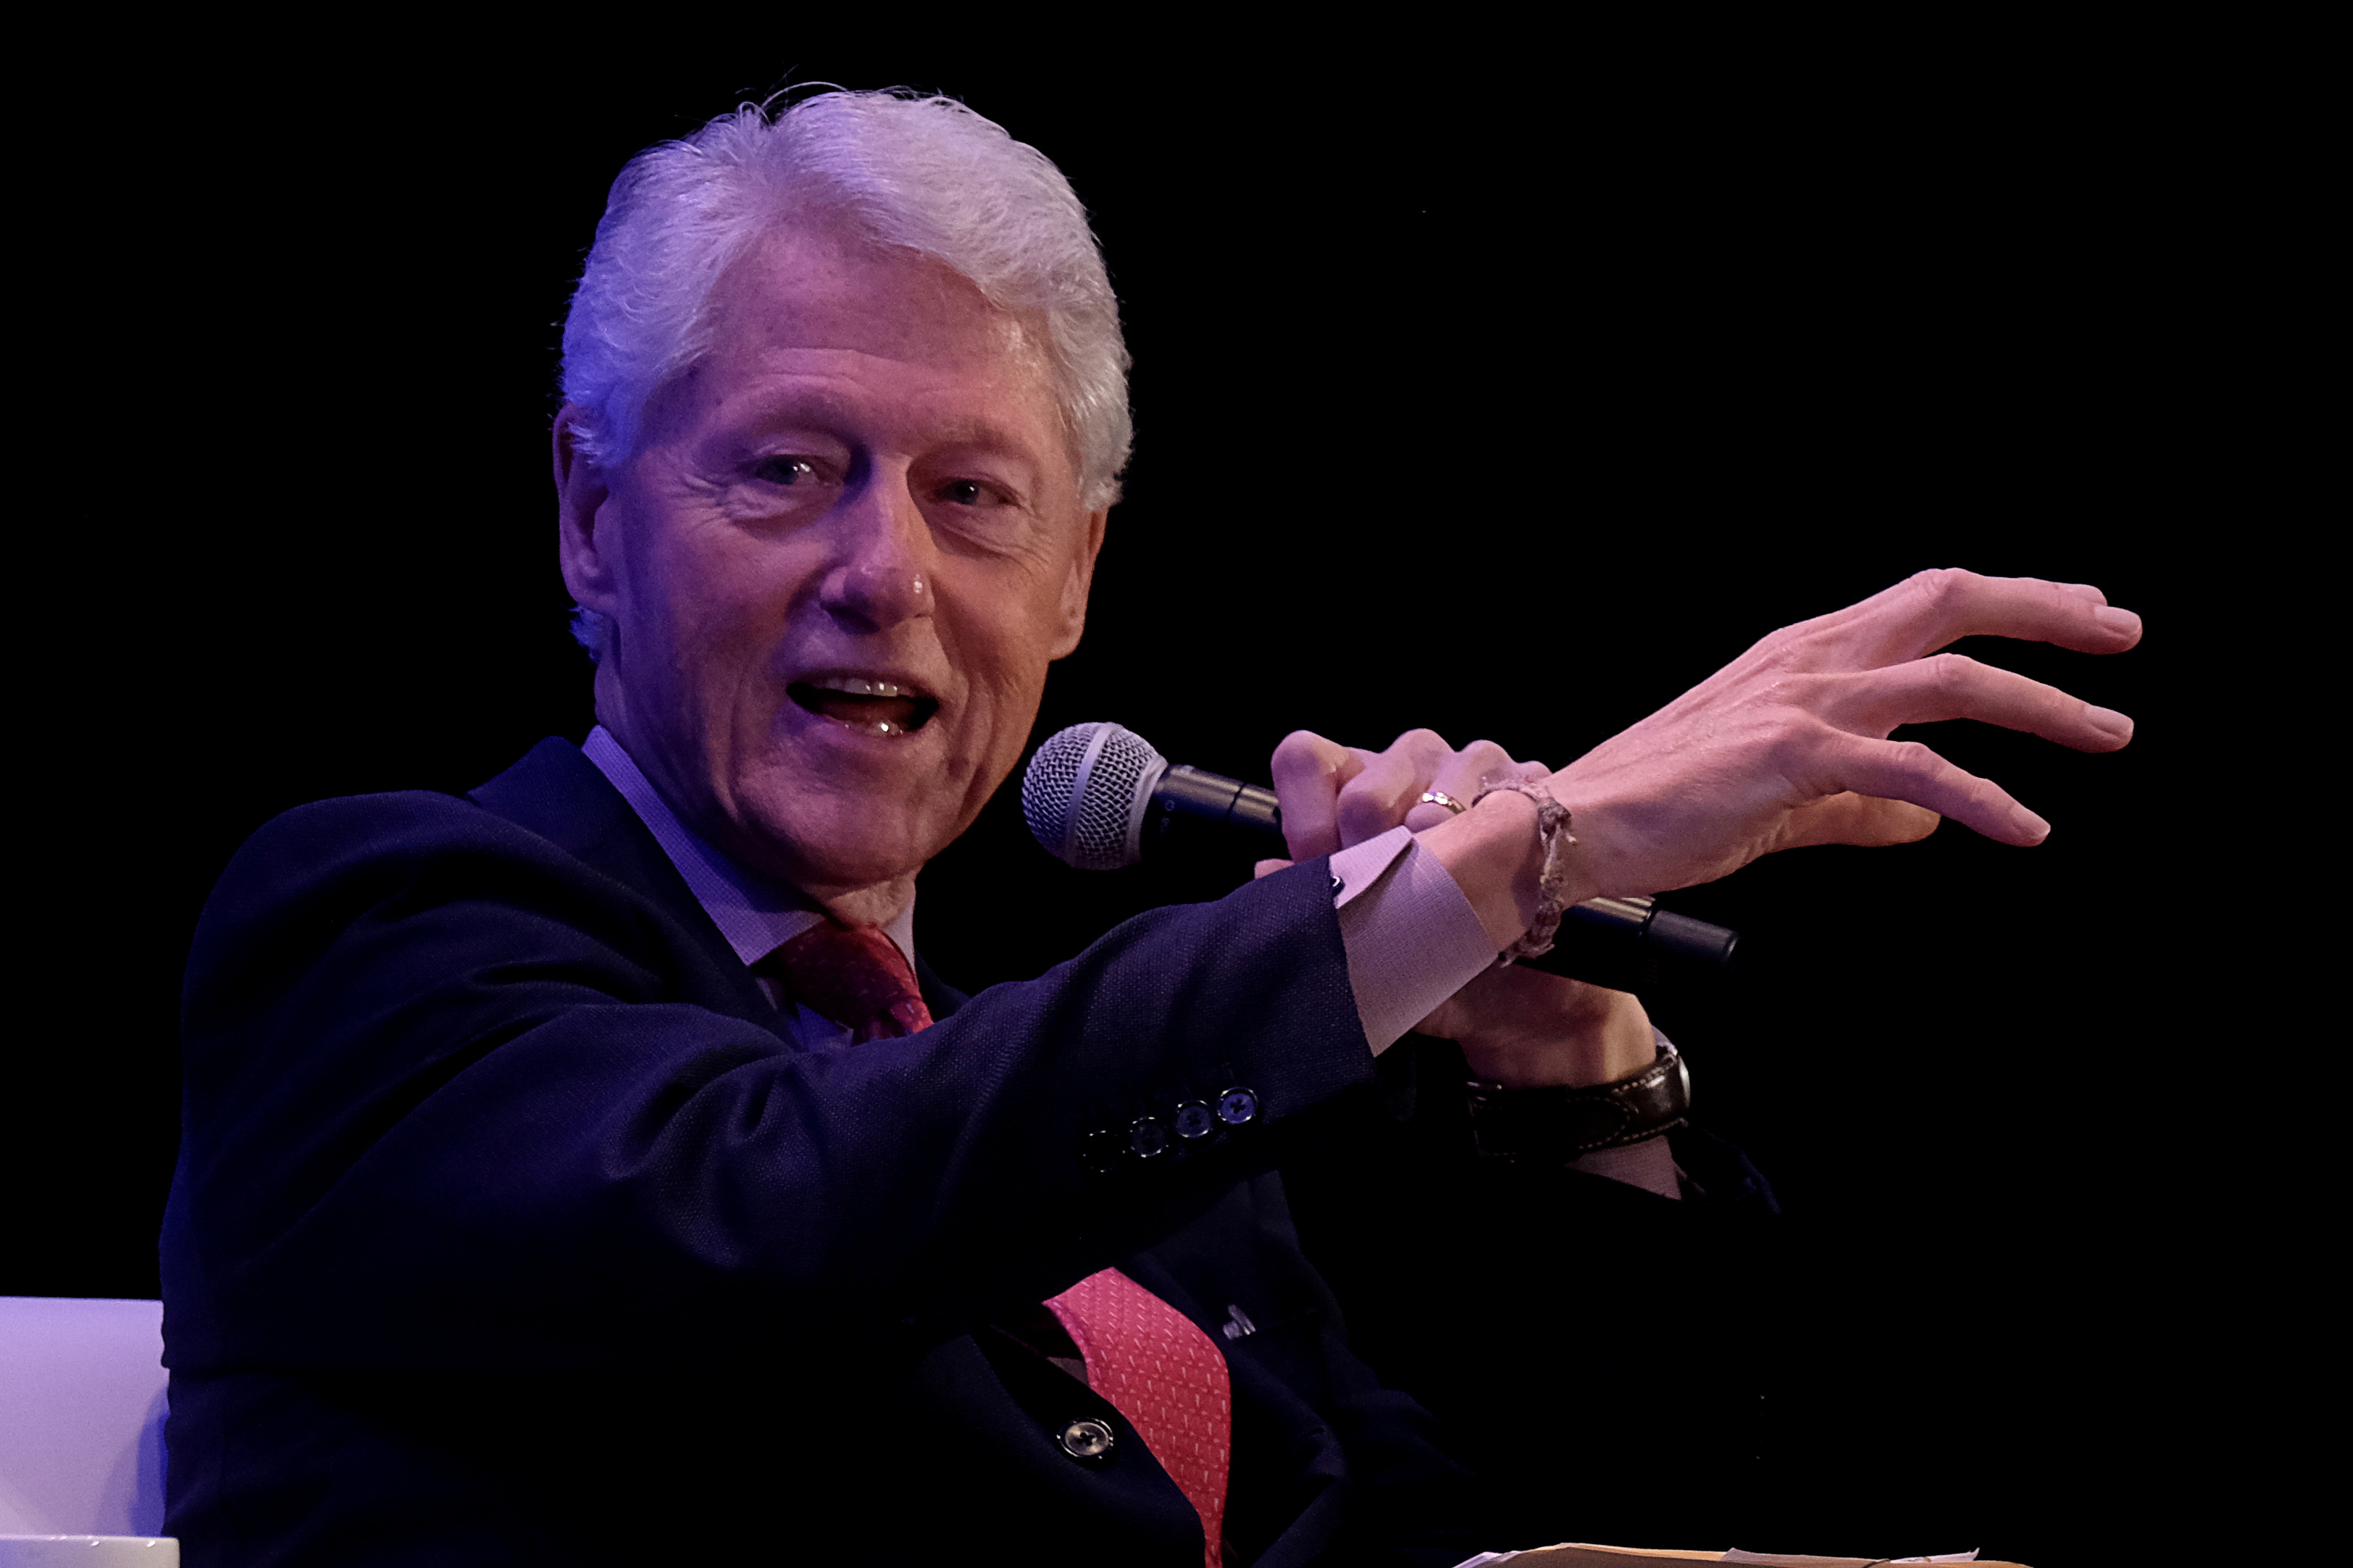 Former U.S. President Bill Clinton attends a meeting of the Clinton Global Initiative (CGI) Action Network in San Juan, Puerto Rico February 18, 2020.  REUTERS/Ricardo Arduengo